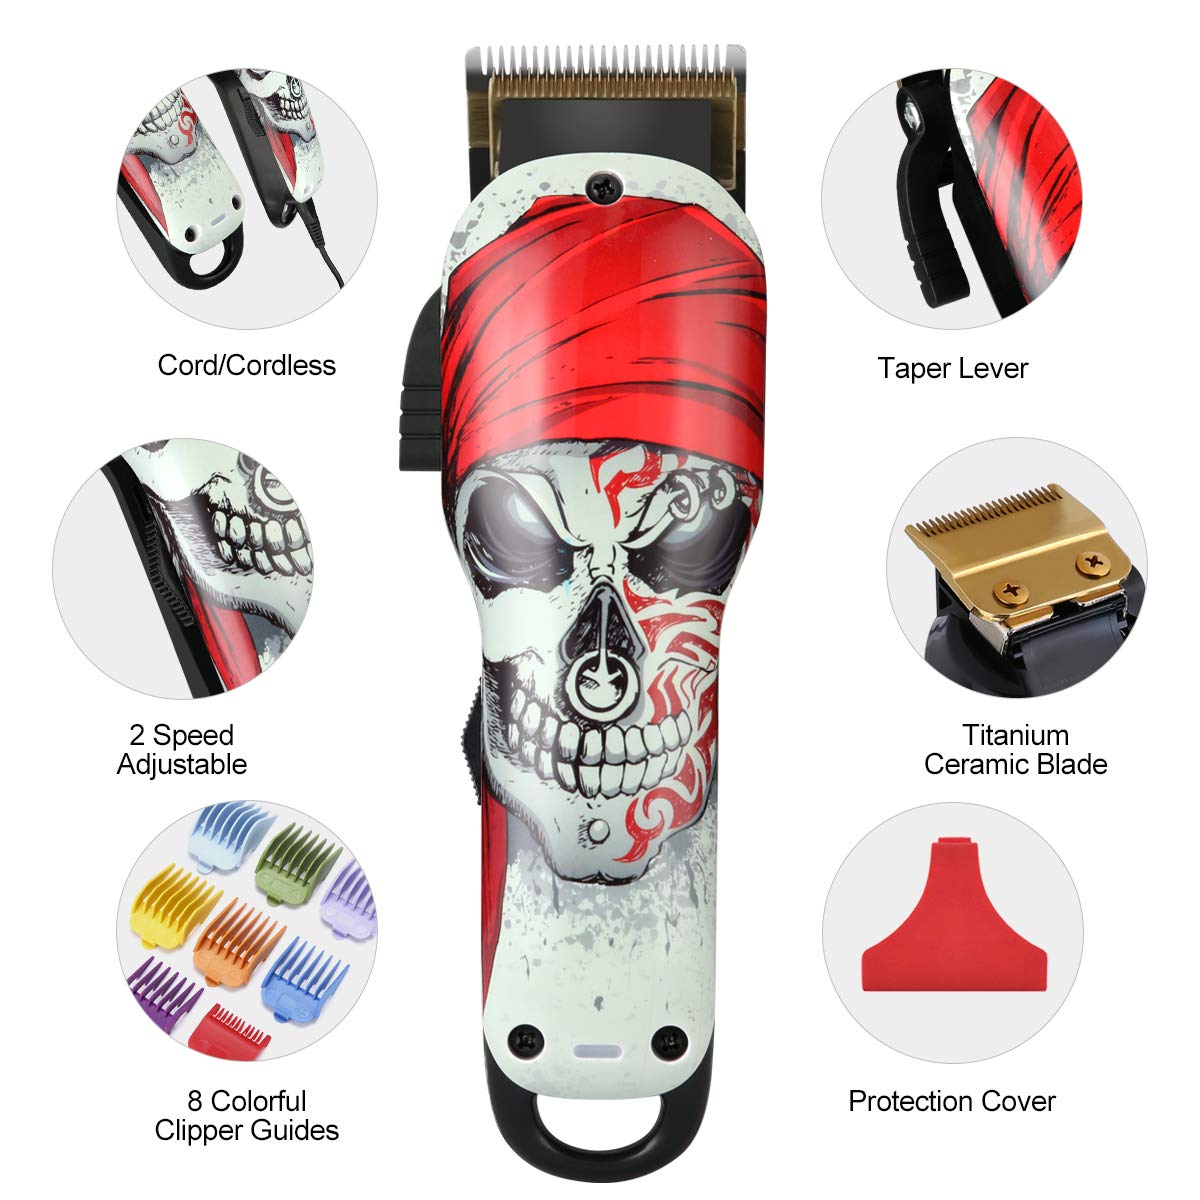 Top Hair Clippers Brands